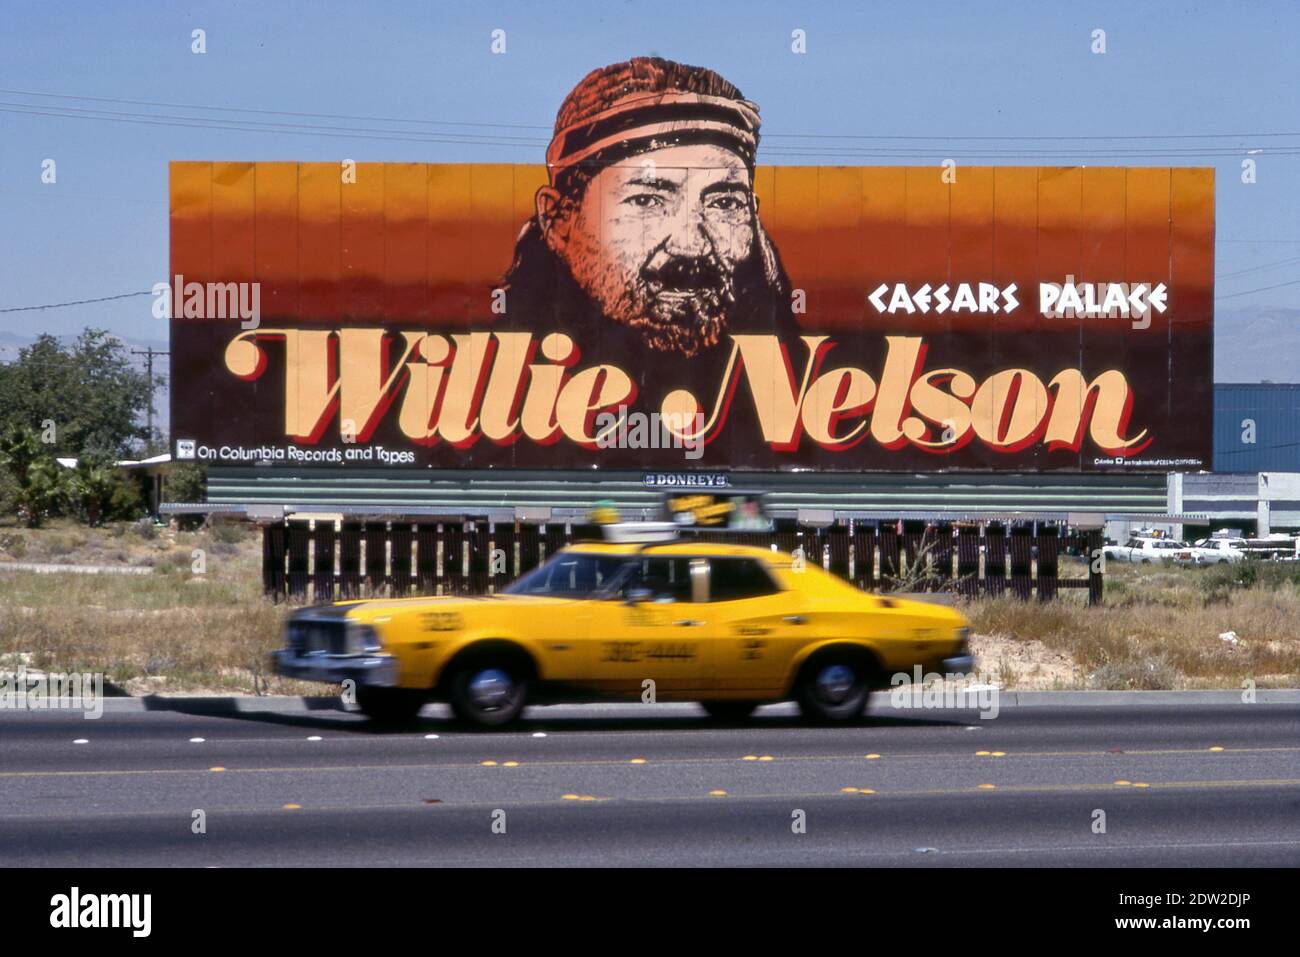 Billboard promoting Willie Nelson appearance at Caesar's Palace in Las Vegas, Nevada circa 1970s Stock Photo